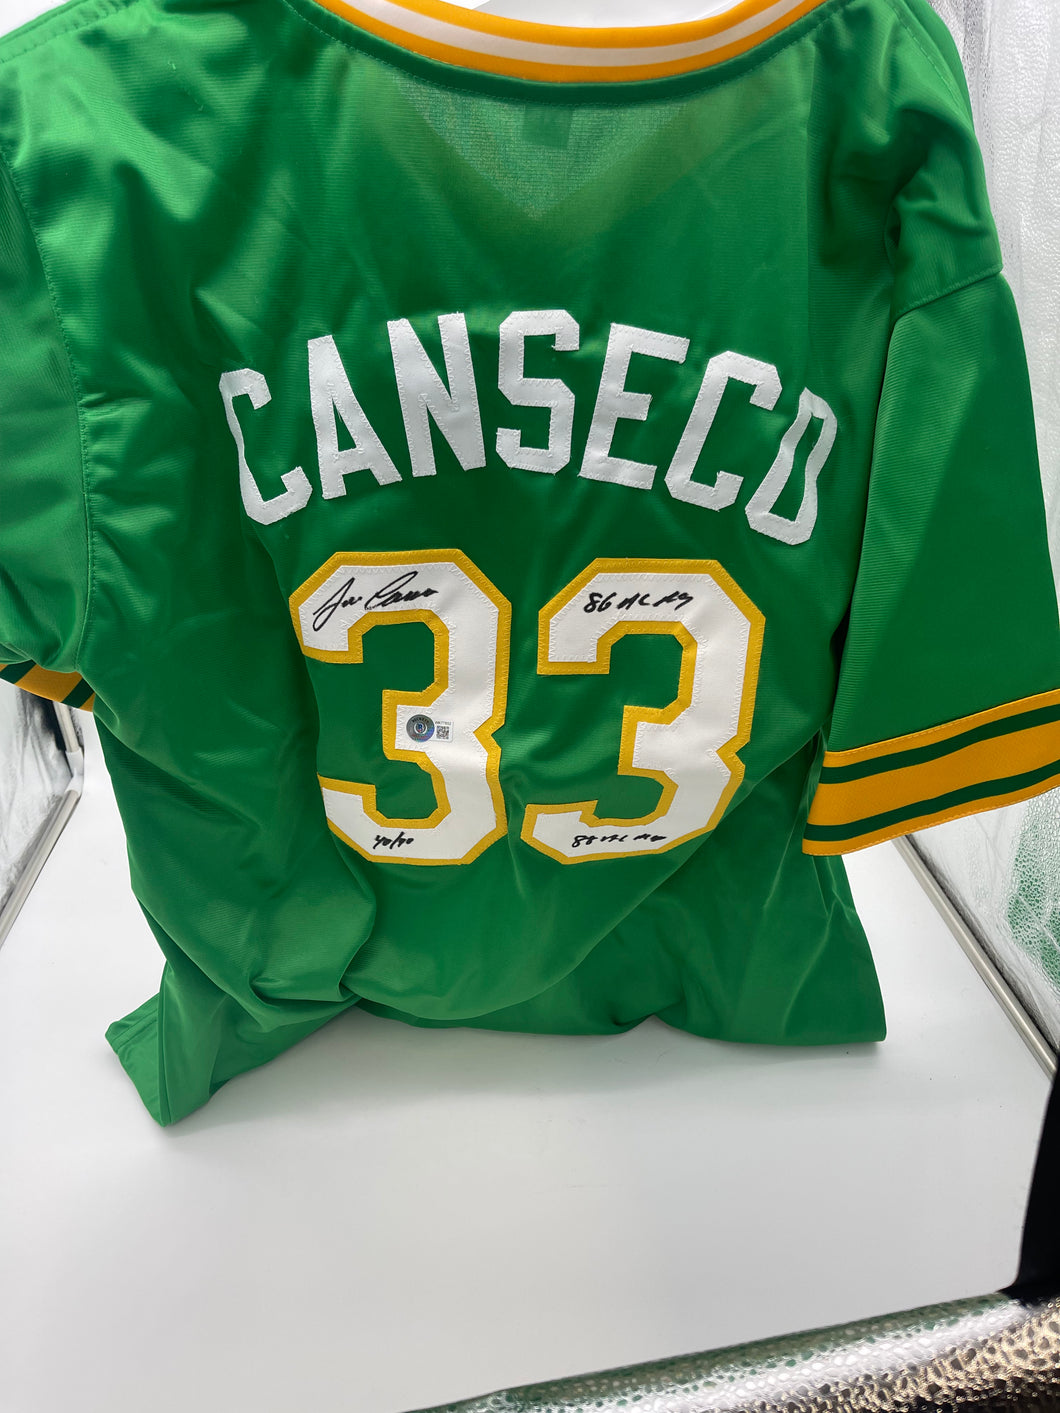 Jose Canseco signed jersey